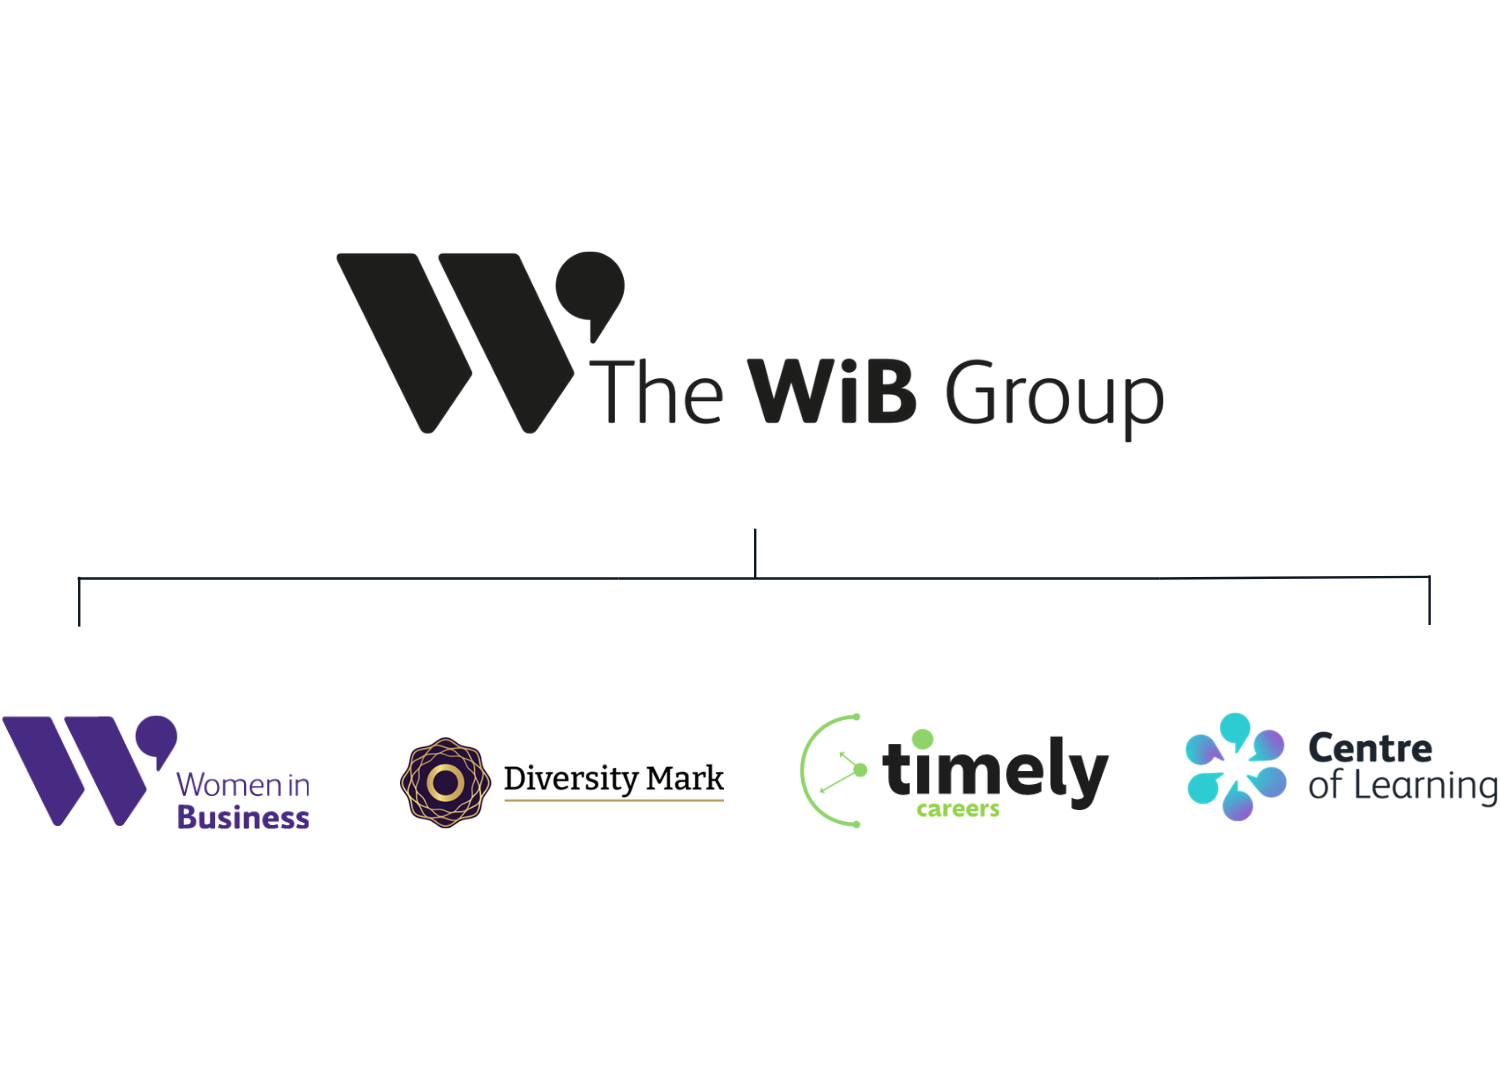 The WiB Group